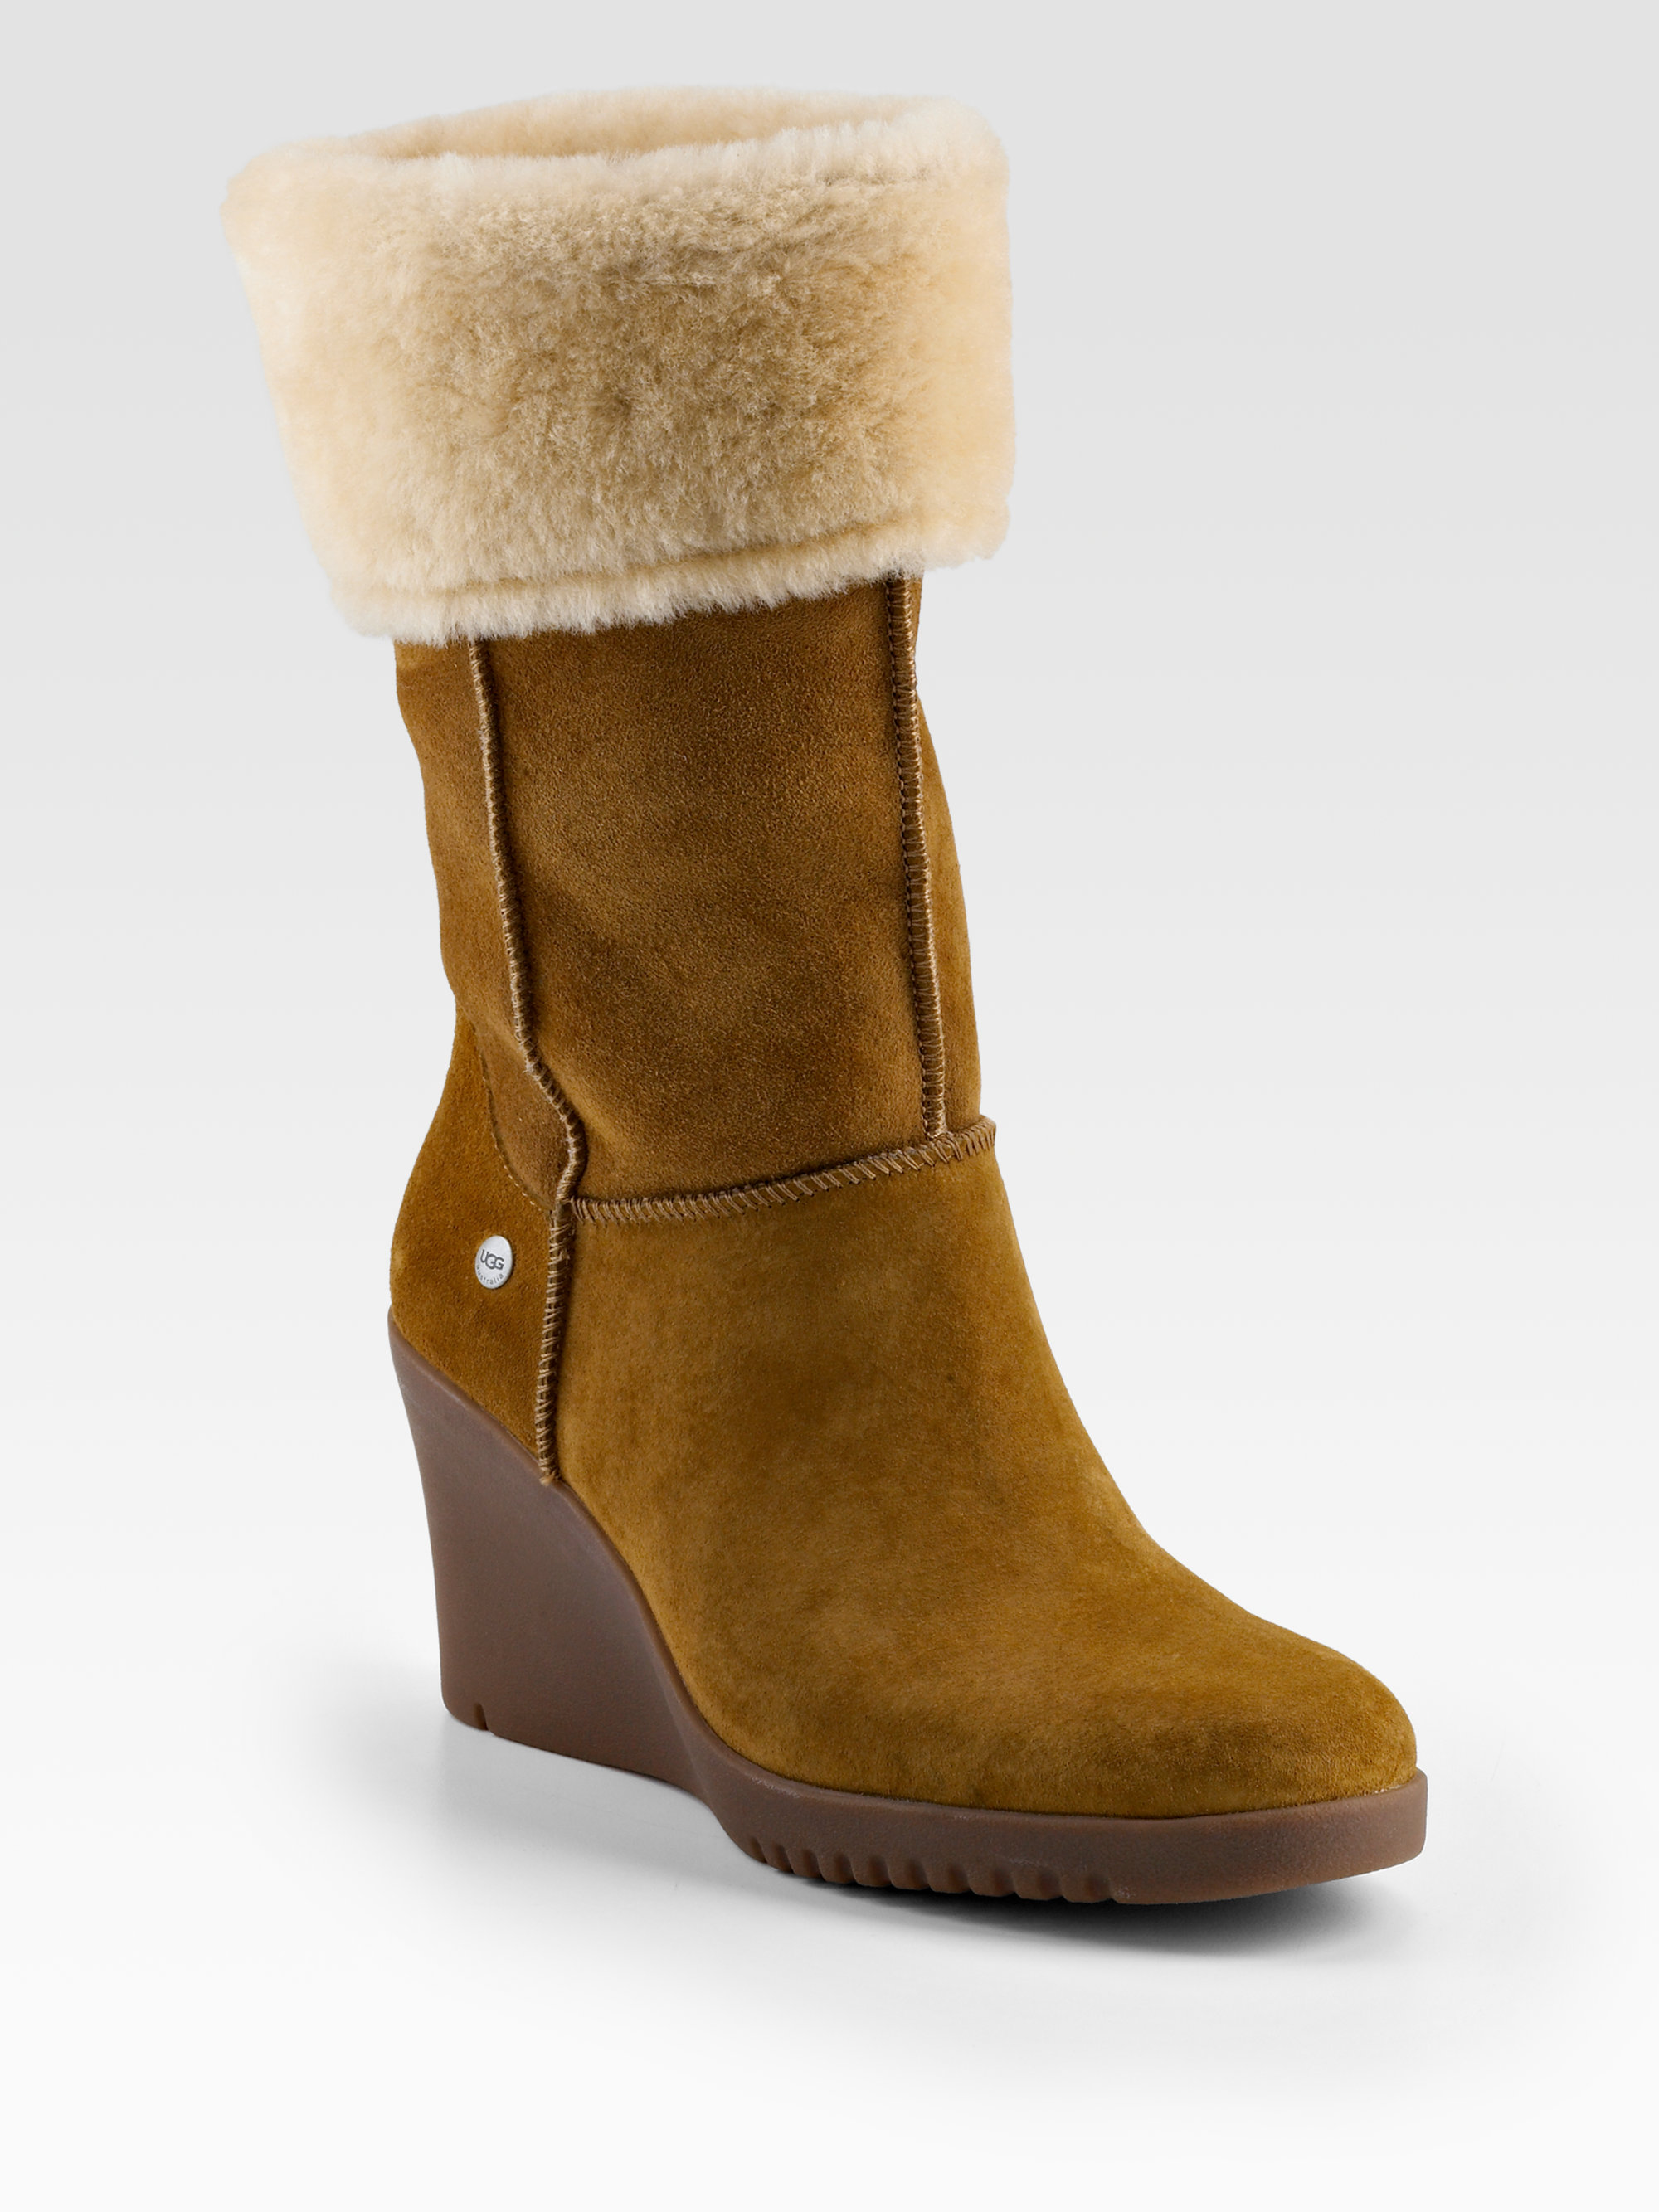 UGG Shearling Cuff Suede Wedge Boots in Brown | Lyst